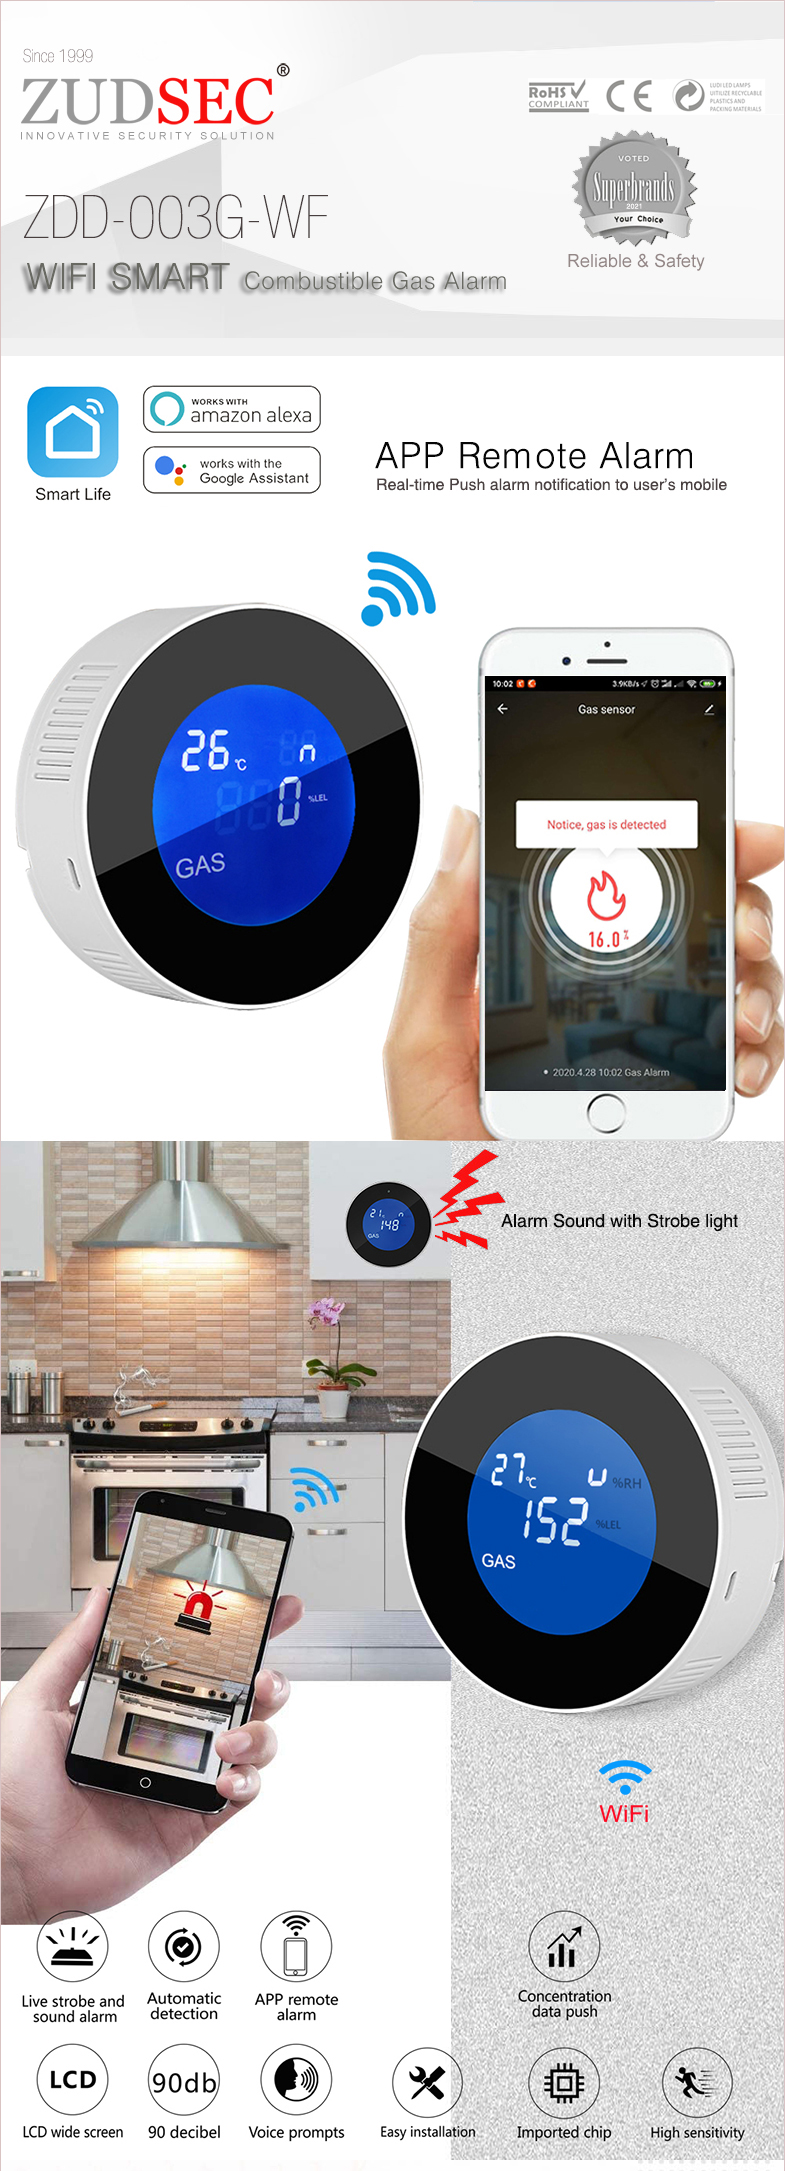 WiFi Smart Combustible Gas Alarm(图1)